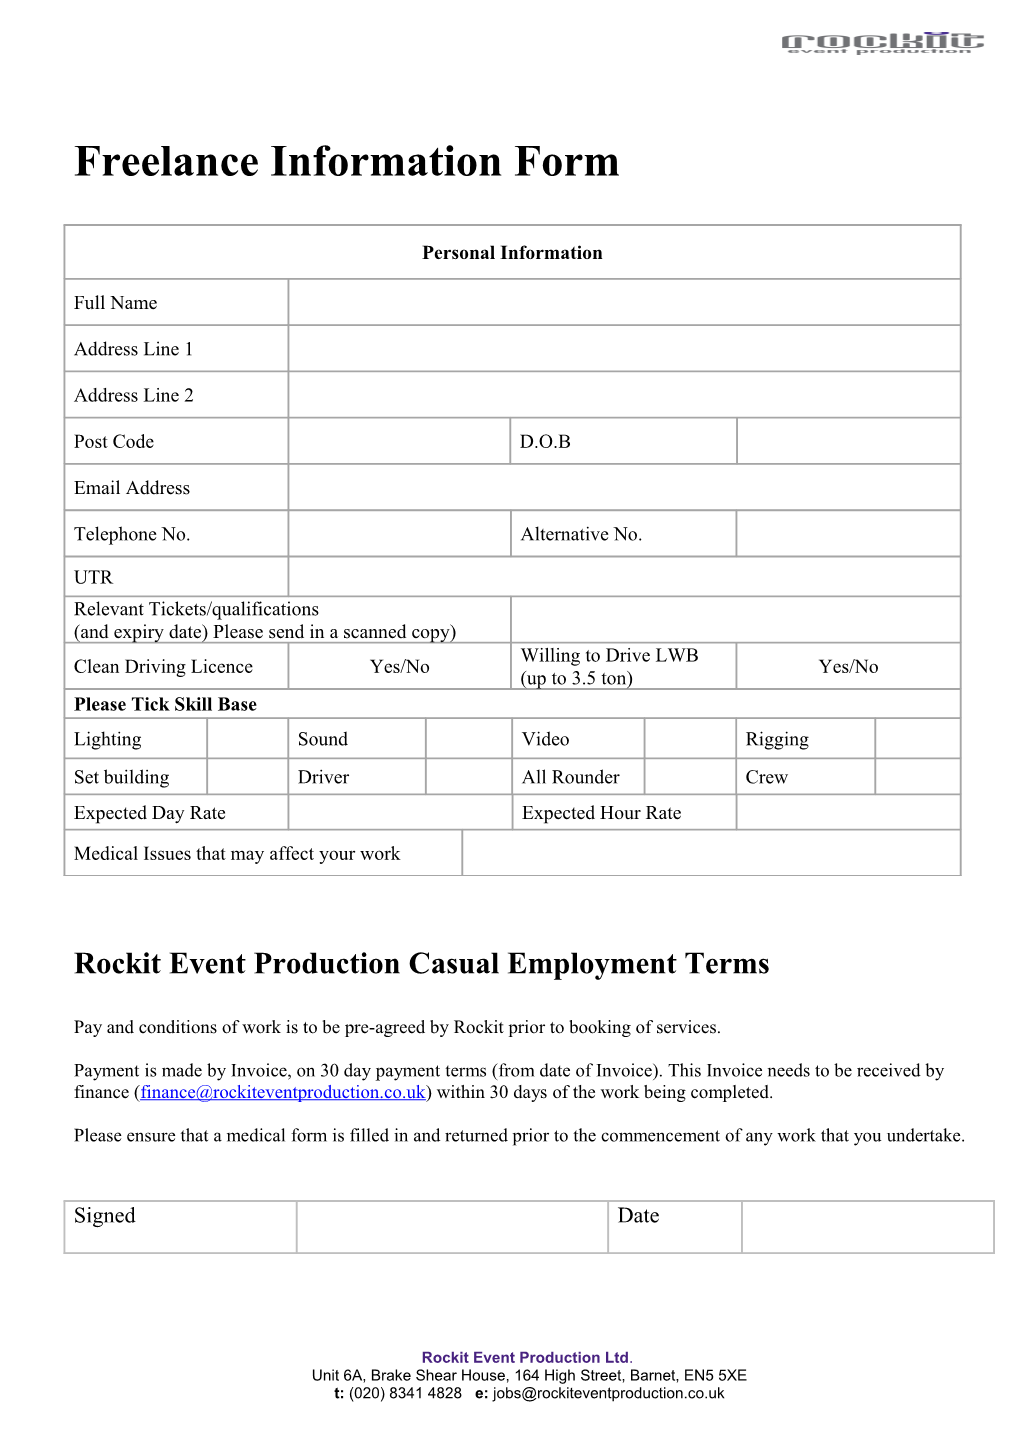 Rockit Event Production Casual Employment Terms